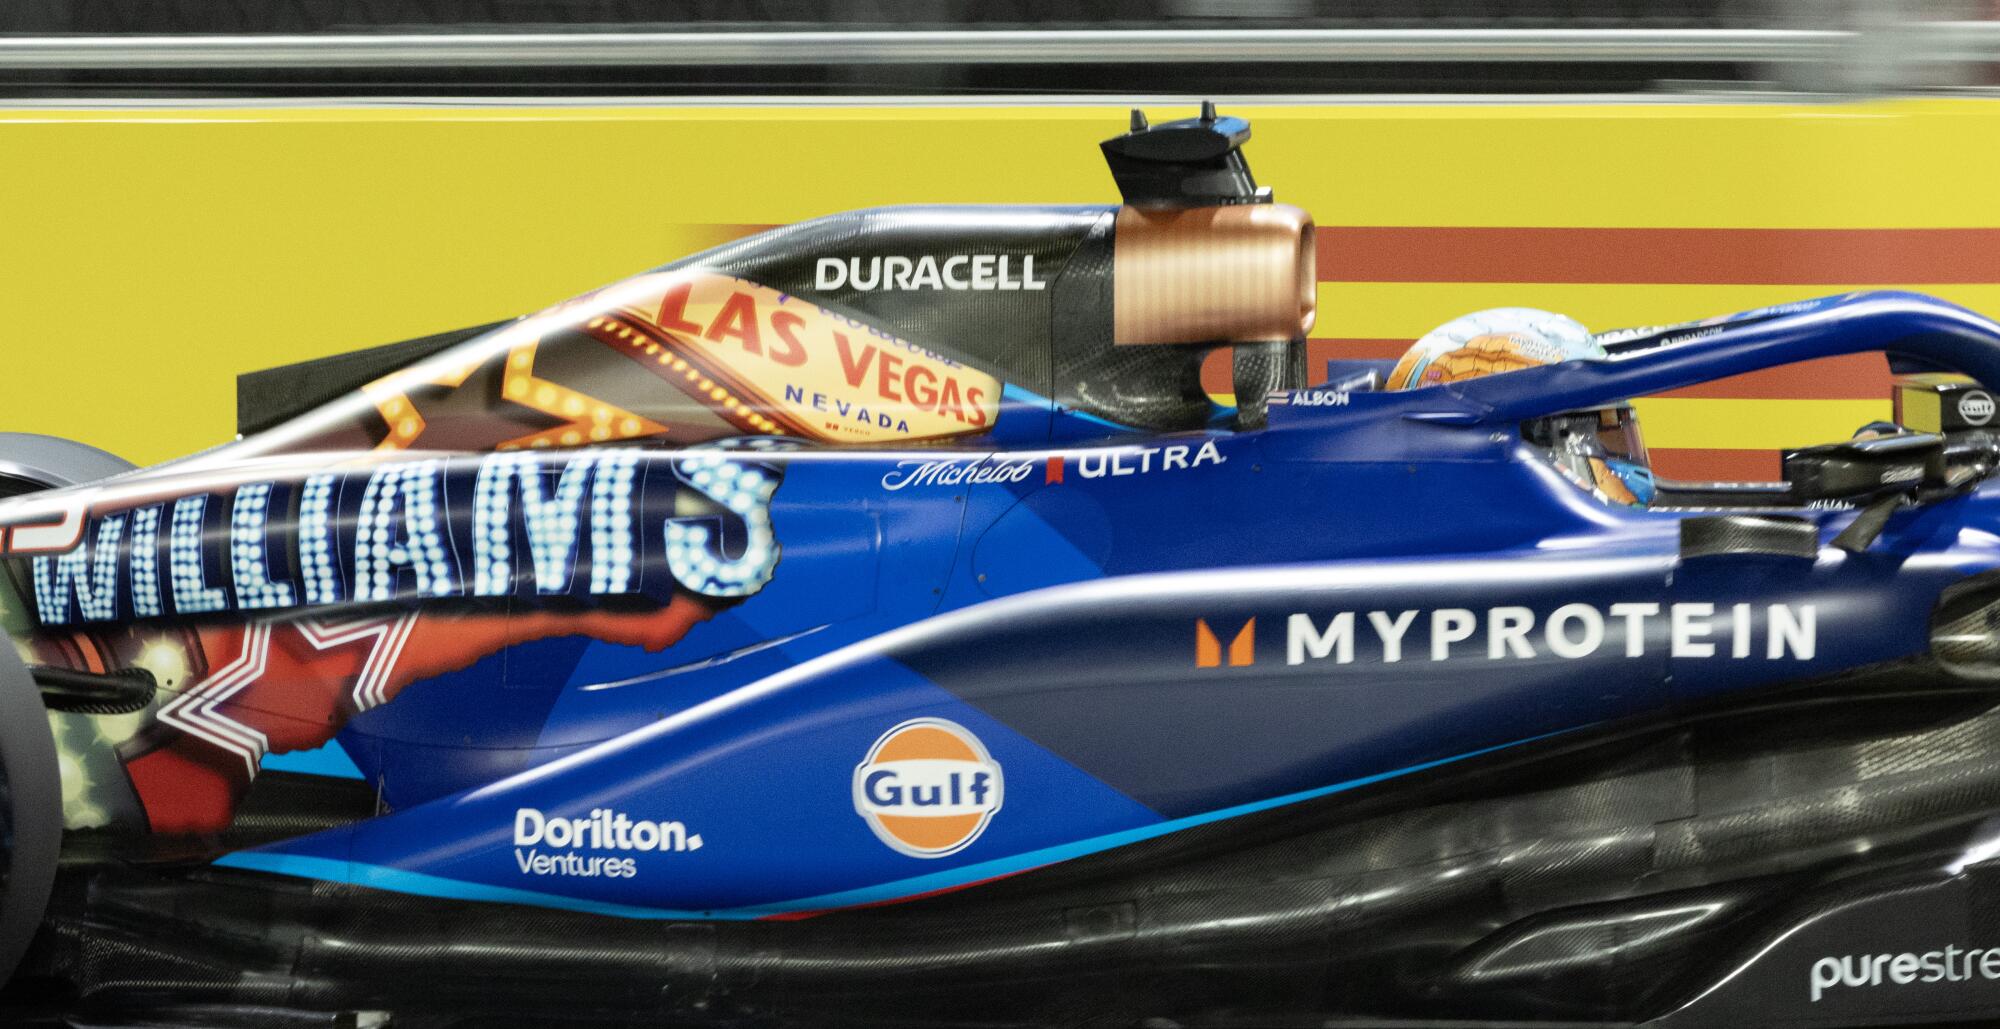 Close-up of Alex Albon as he drives his Las Vegas-themed Williams during practice at the Las Vegas Grand Prix.